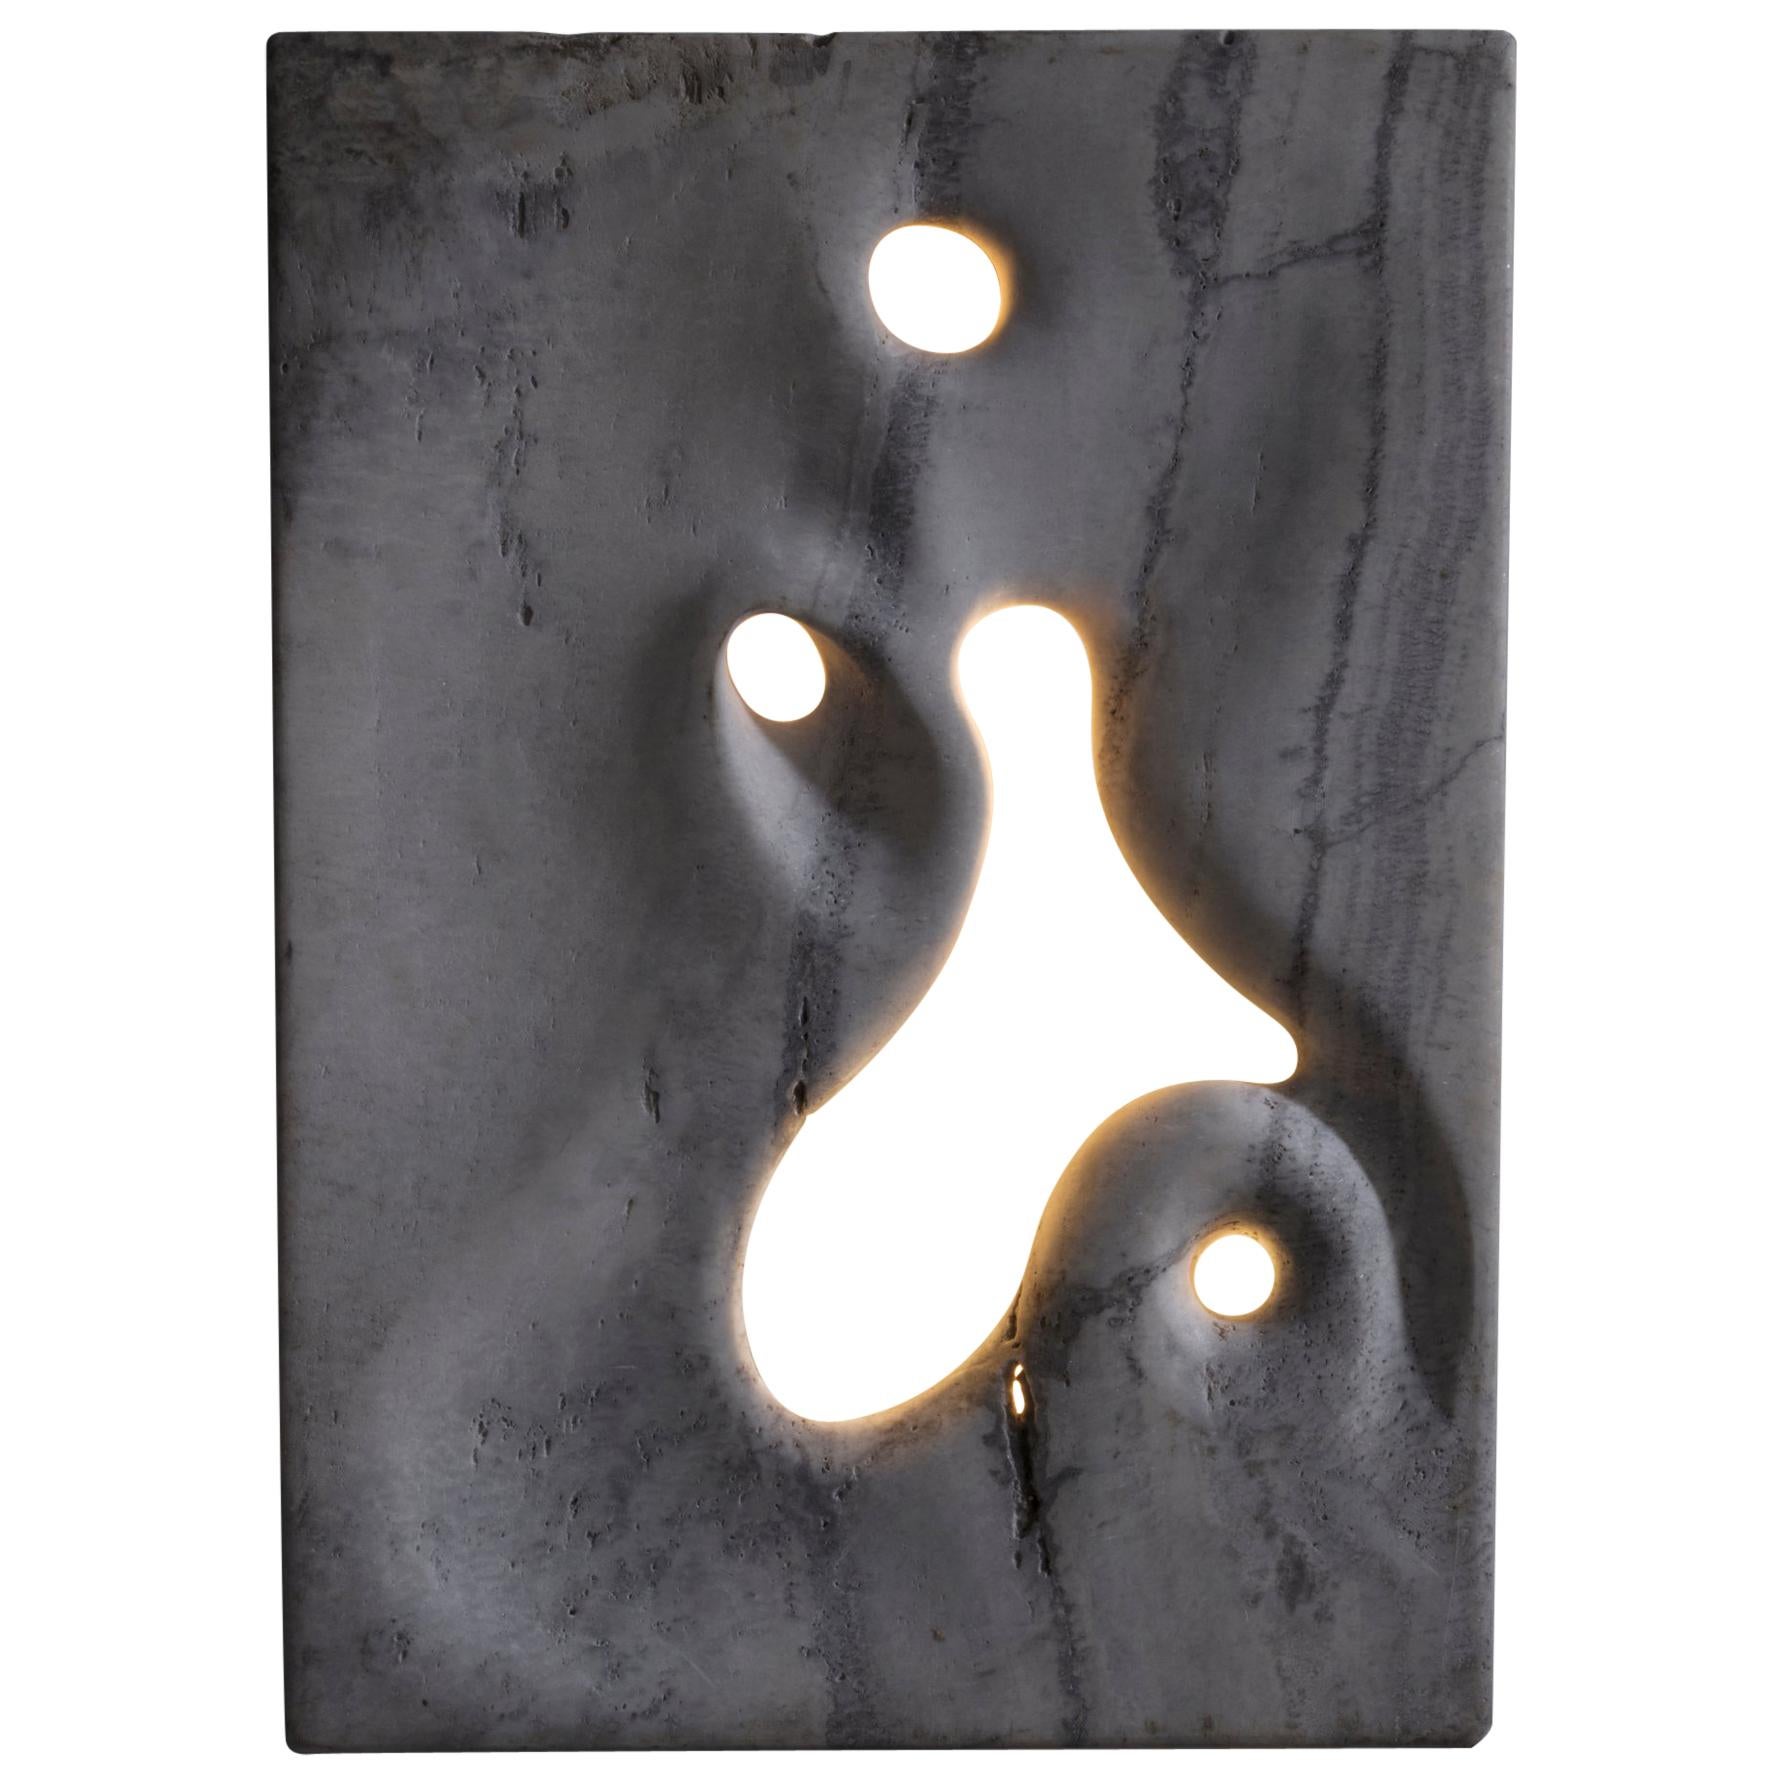 Wall Mounted Illuminated Sculpture in White Travertine by Rogan Gregory, 2016